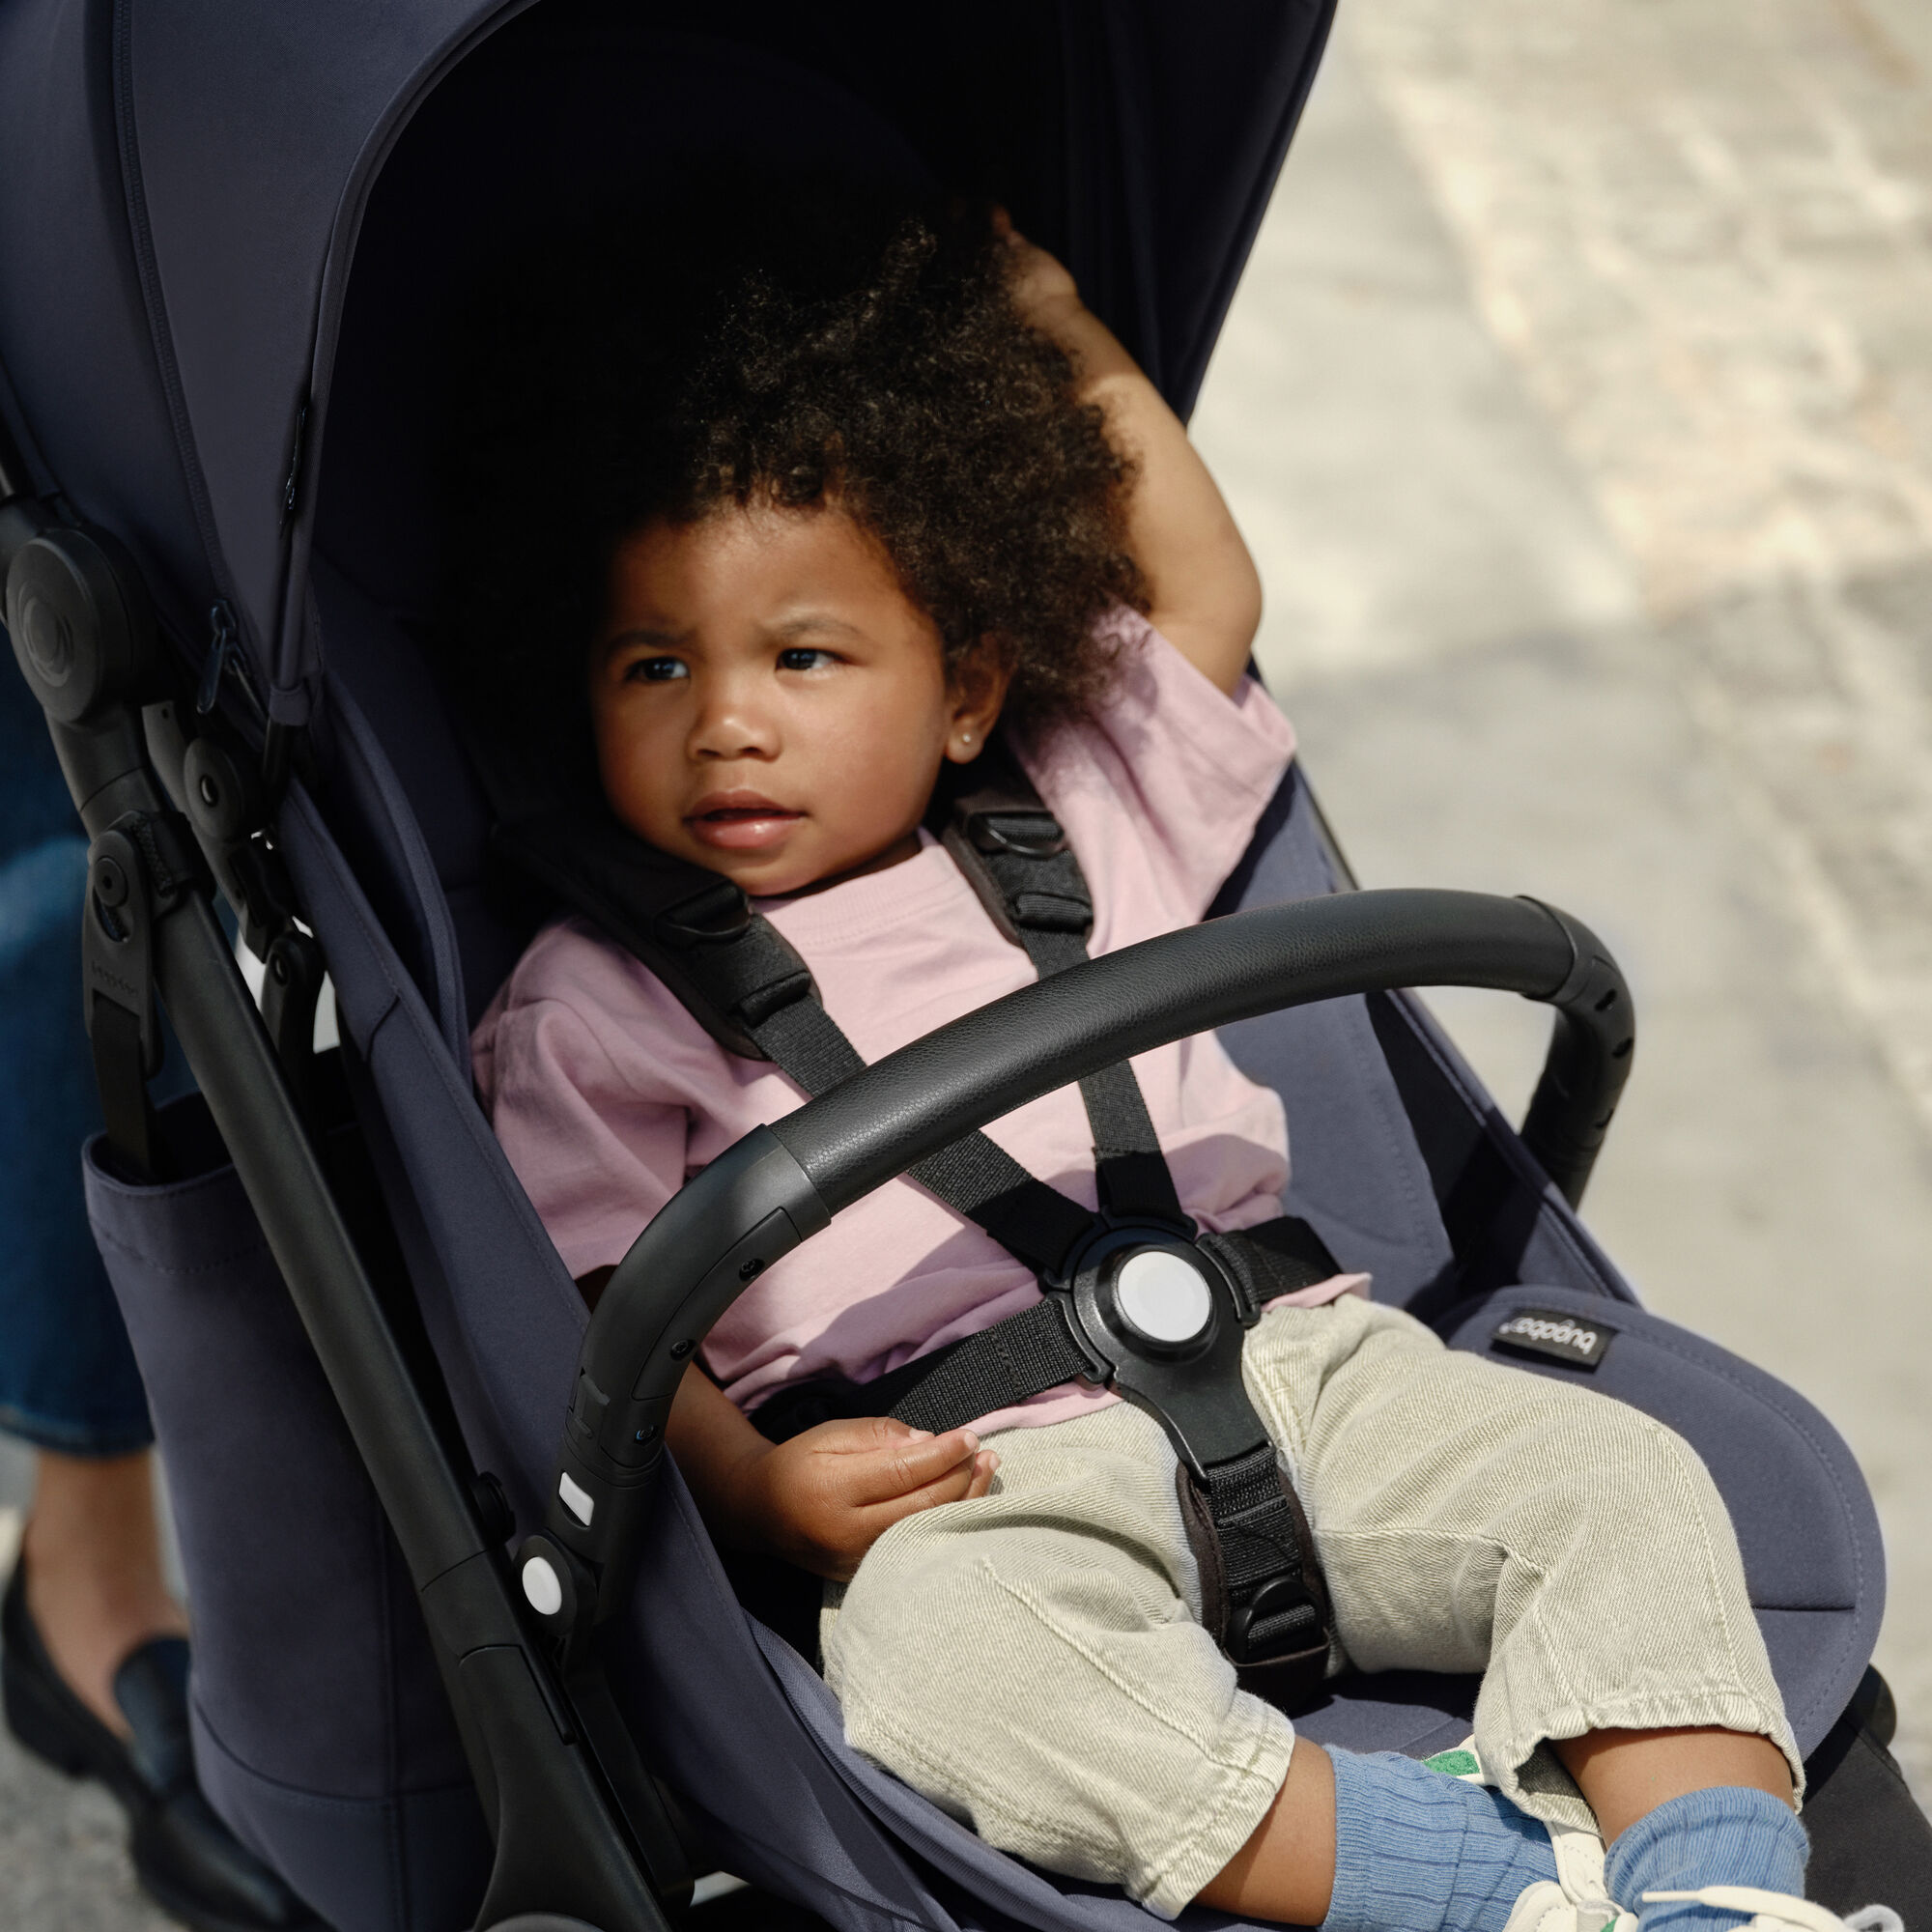 A toddler relaxes in the seat of an ultra-compact Bugaboo Butterfly travel pram. The toddler is securely seated with the harness fastened and a Bugaboo Butterfly bumper bar across their middle. 